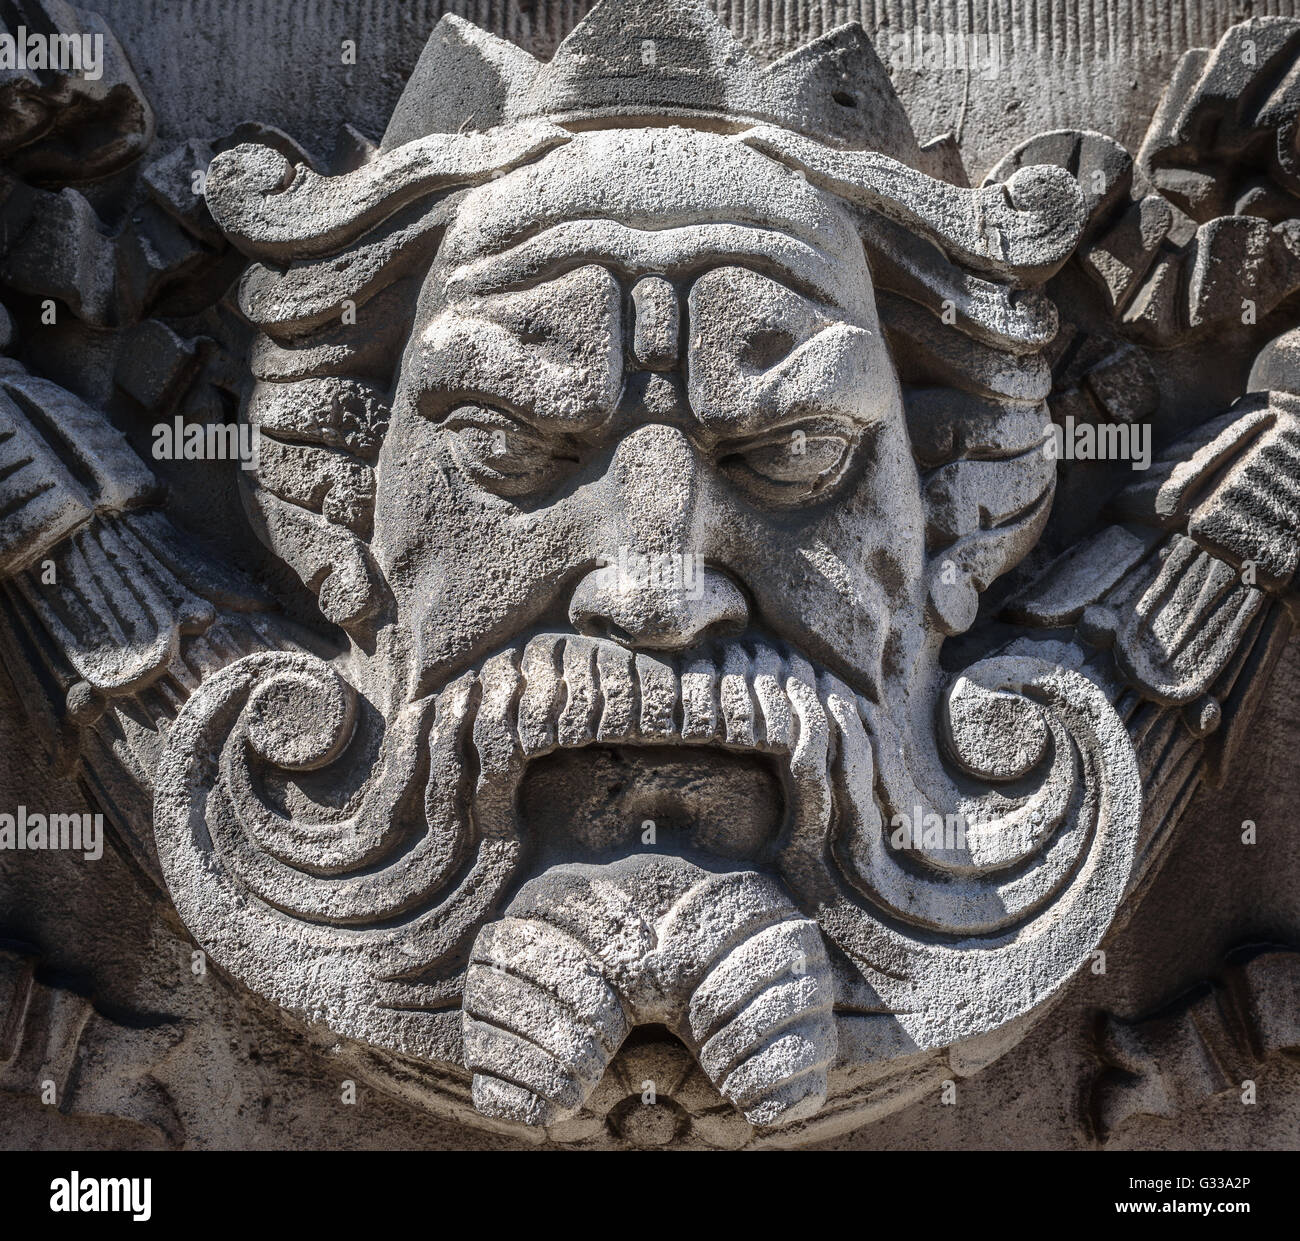 The face of a king carved in stone on the facade of a building in Liverpool. Stock Photo